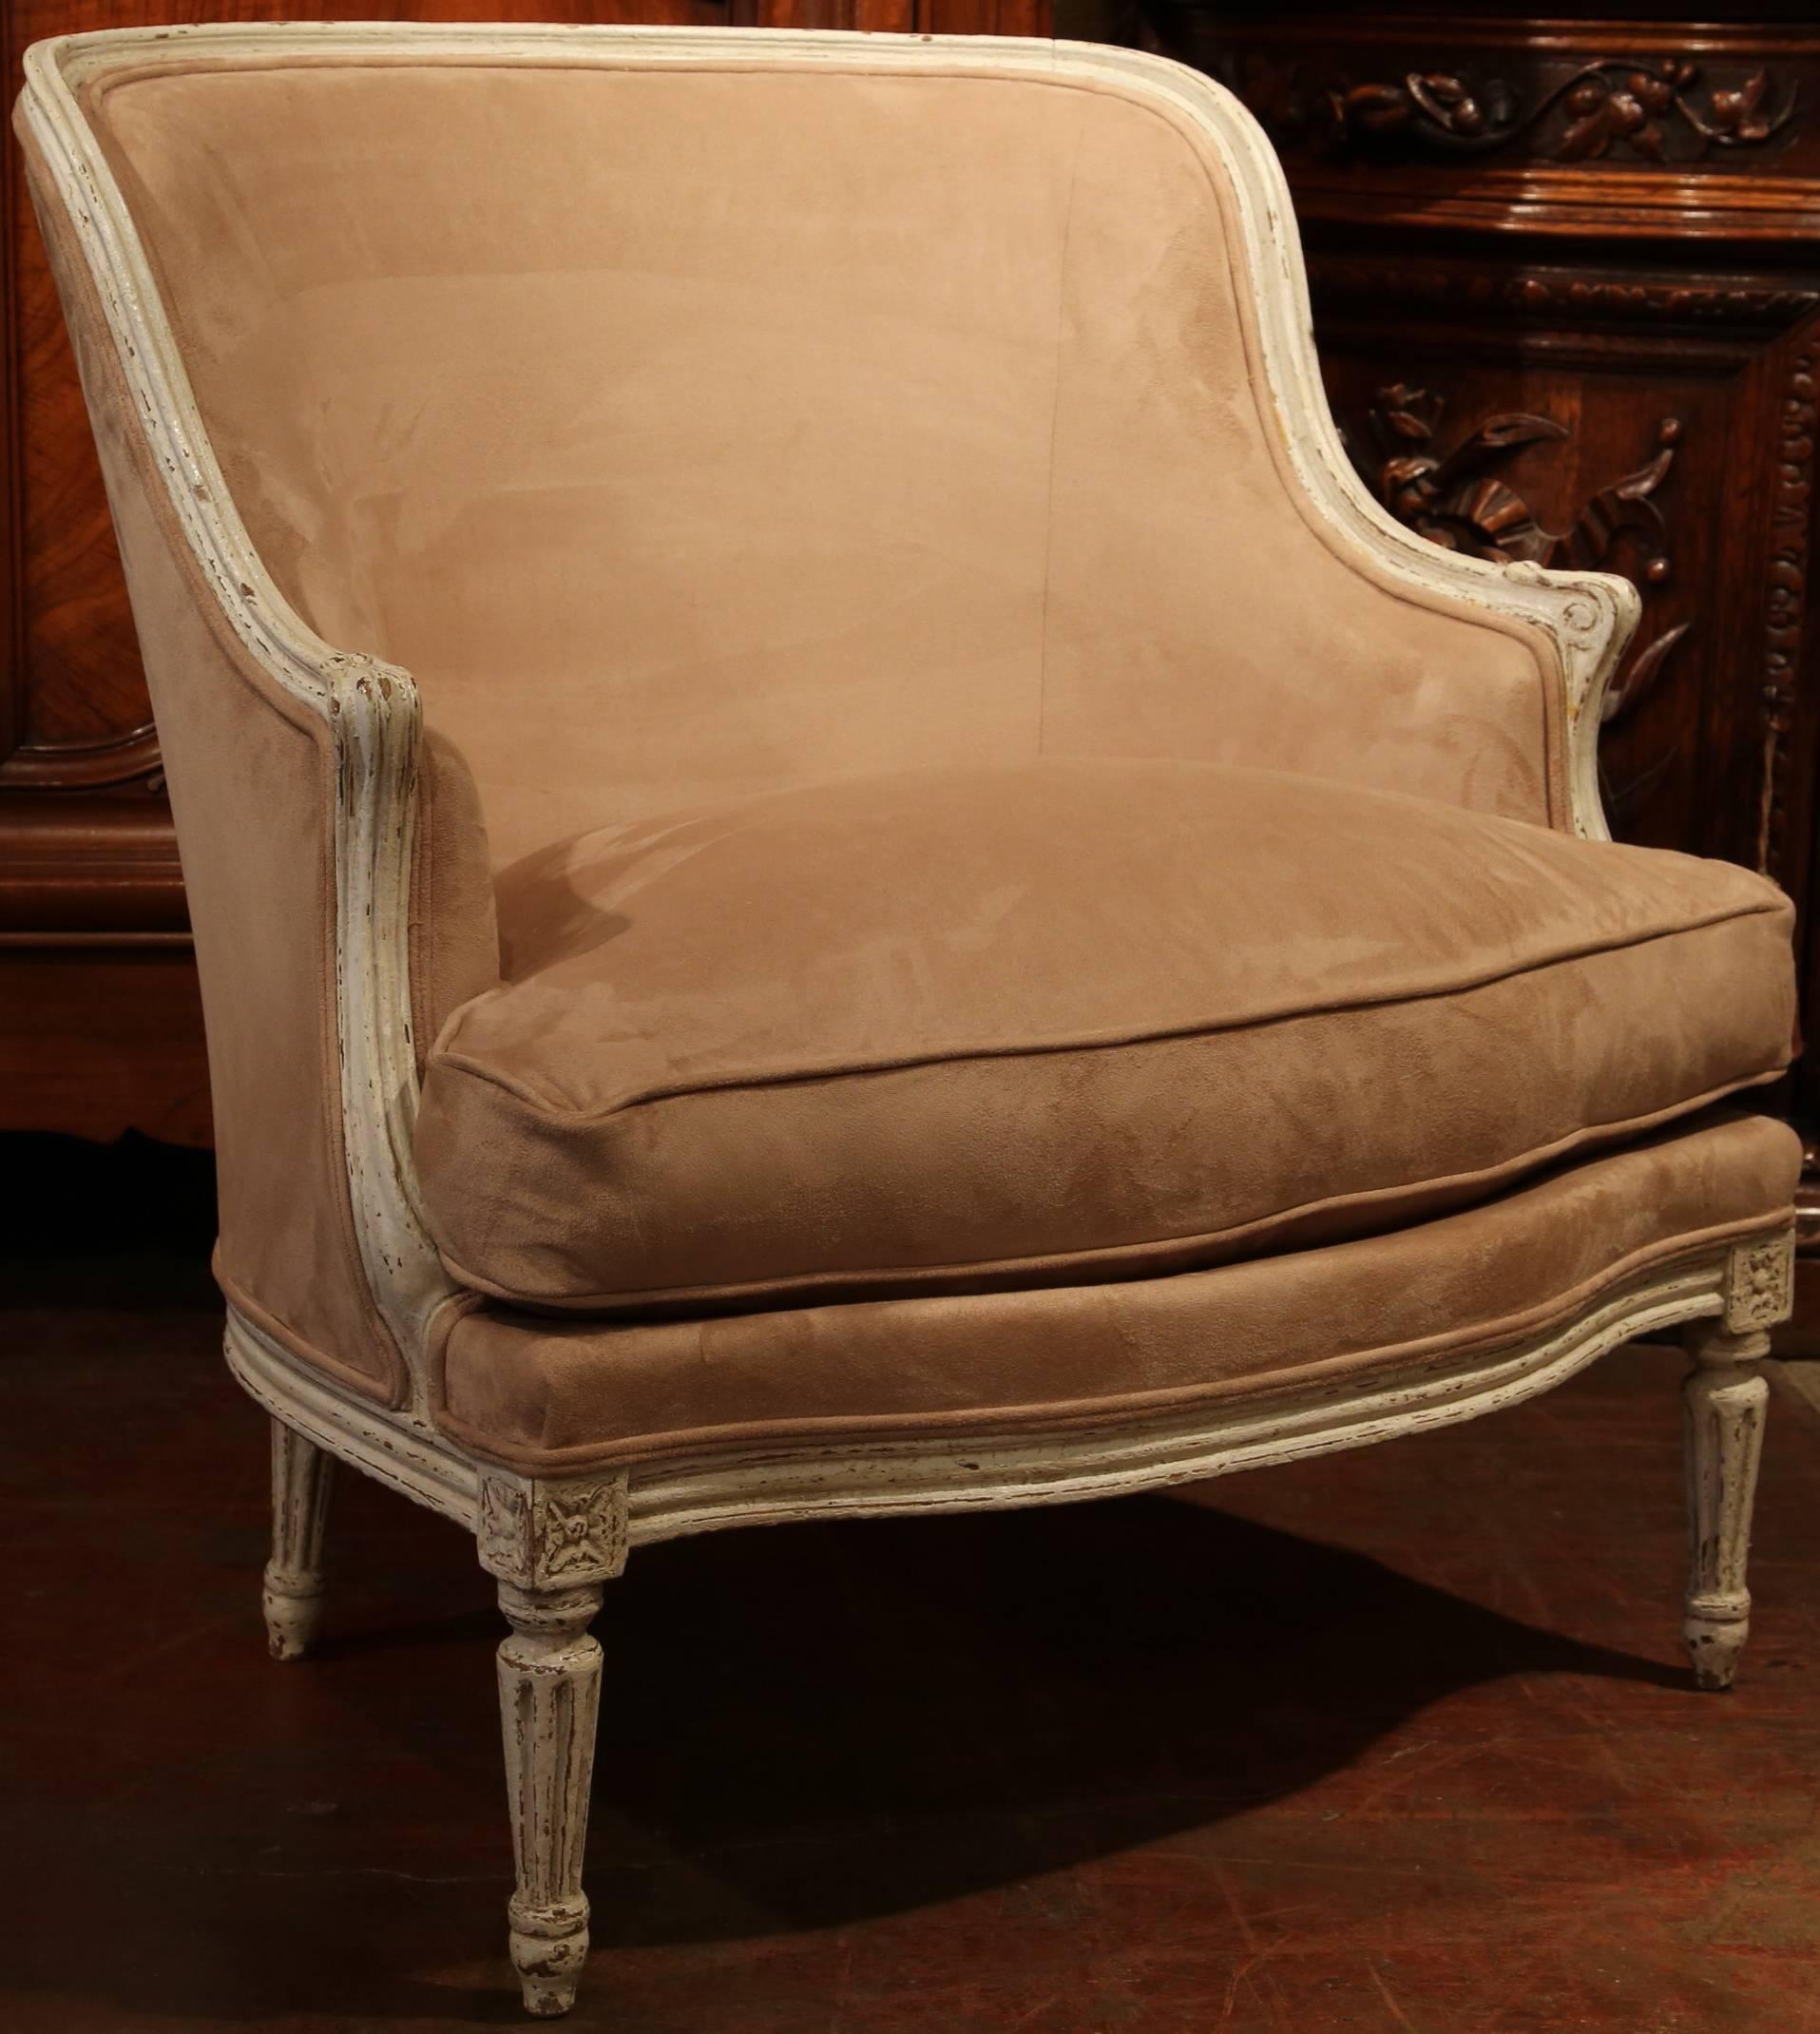 This elegant pair of antique painted armchairs was created in France circa 1880. These chairs have fluted legs, wide seats, curved backs and have been reupholstered with a beige suede fabric and down feathers. Incorporate these comfortable chairs